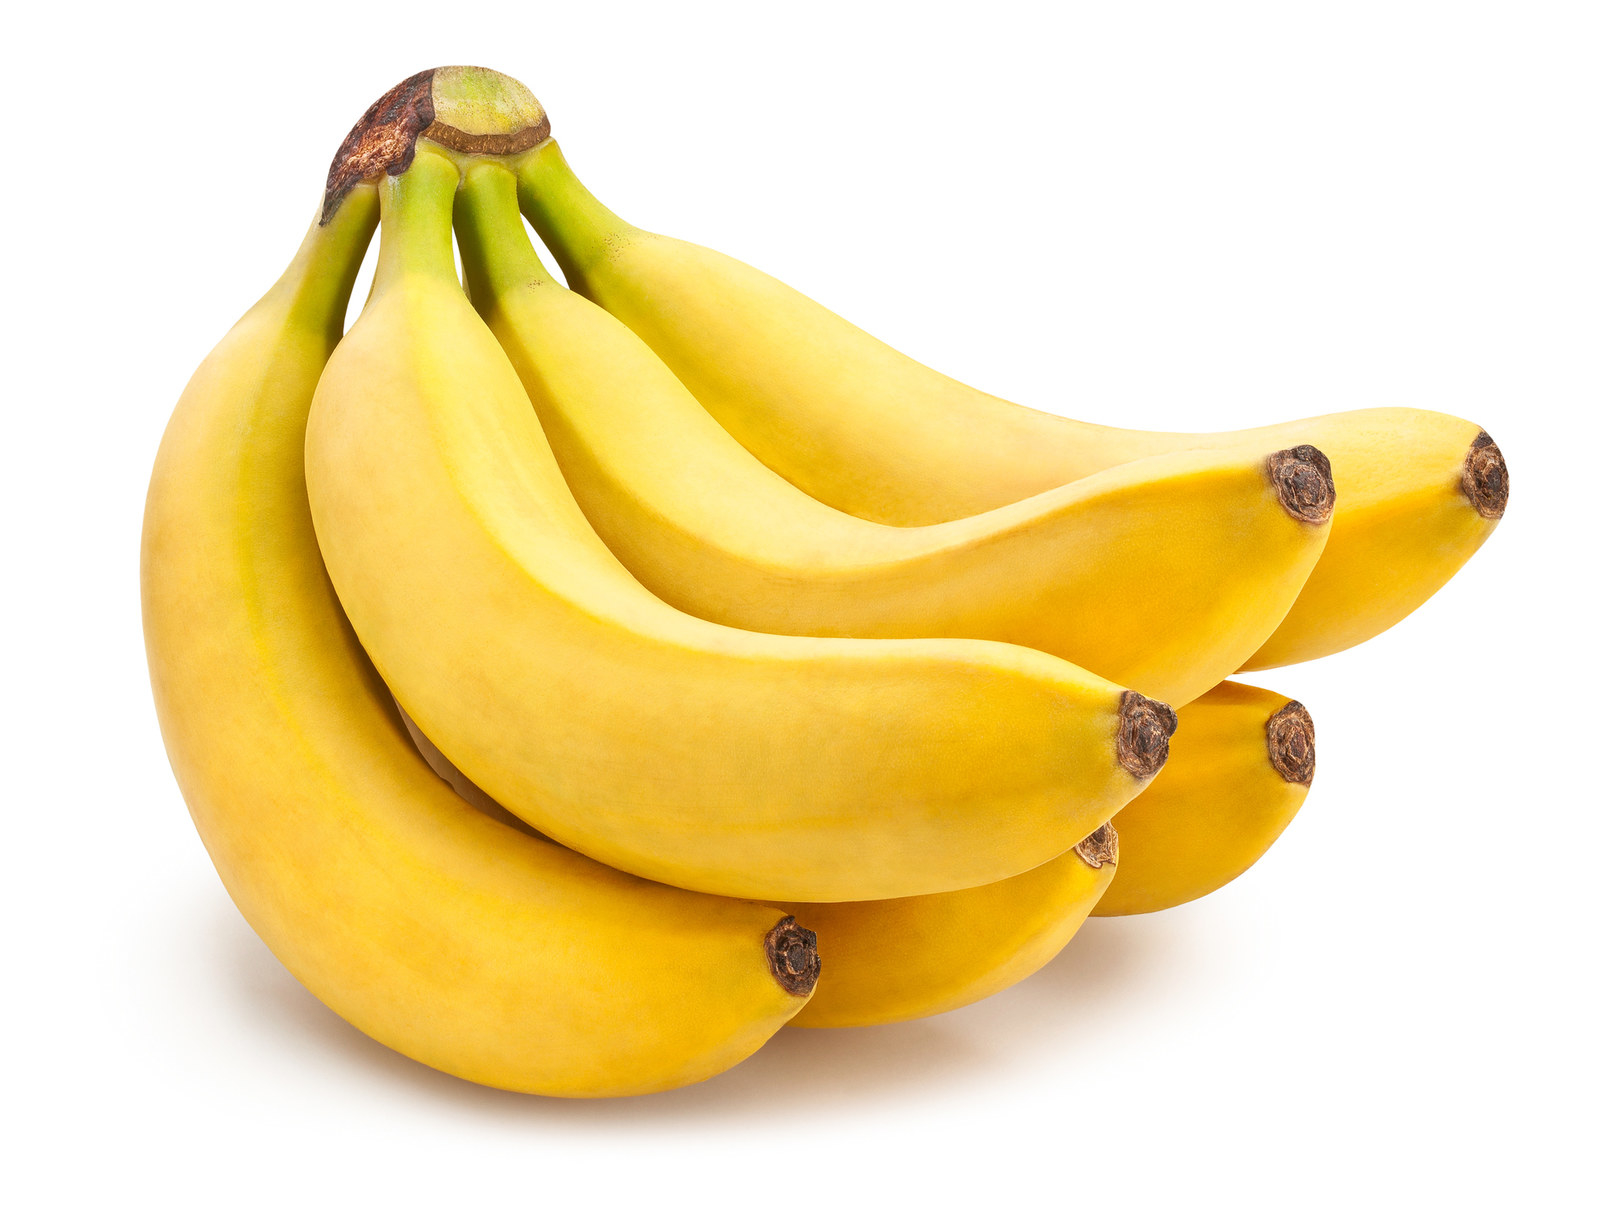 a-korean-market-is-selling-packs-of-bananas-of-varying-ripeness-and